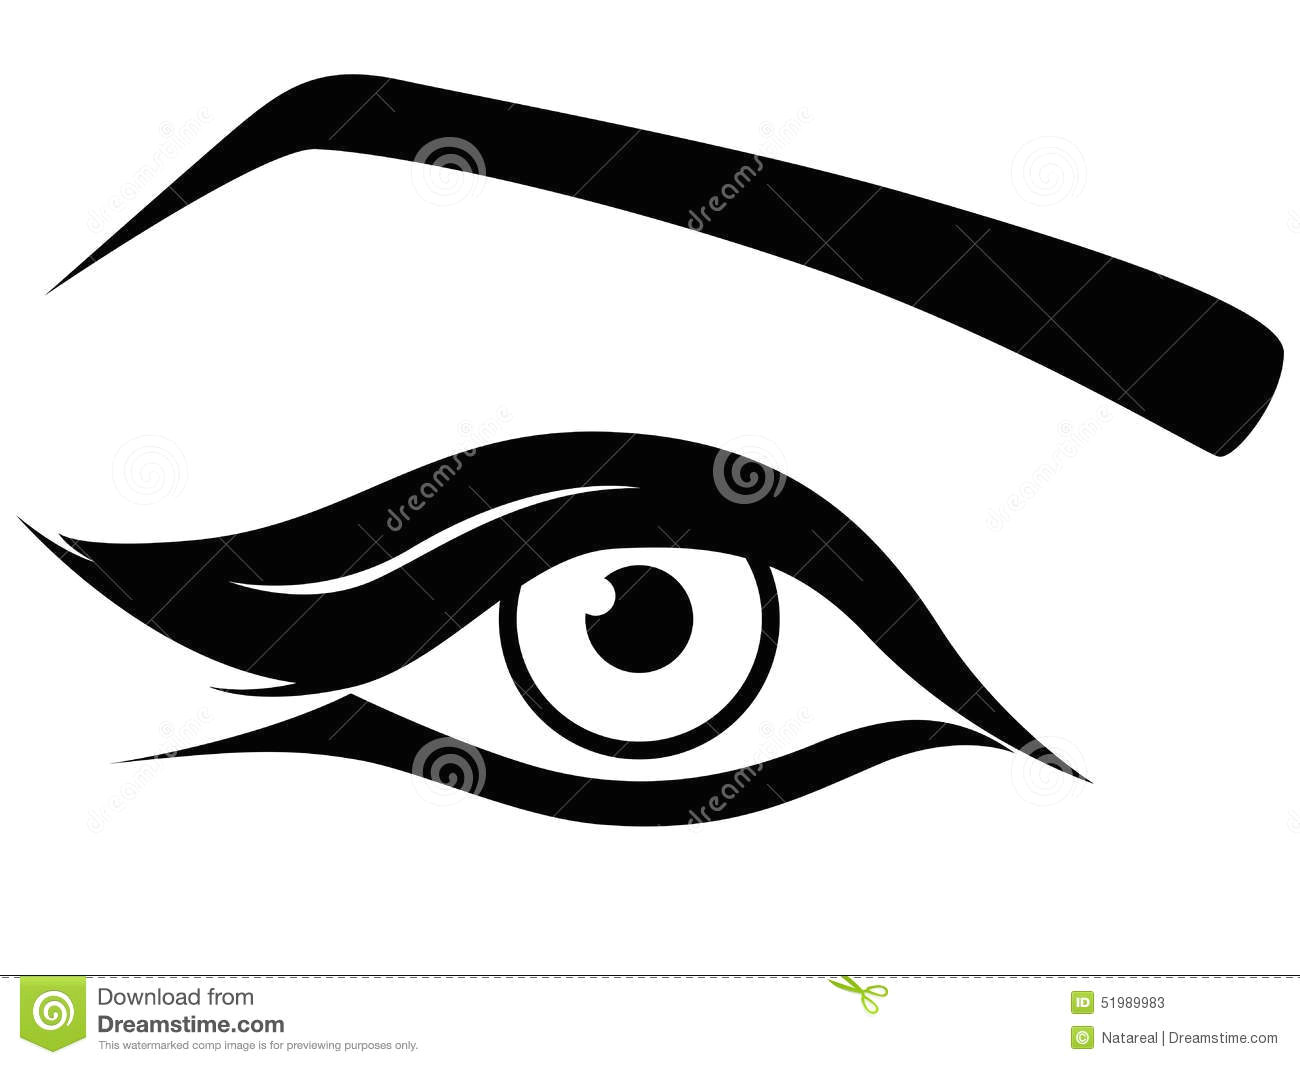 eye silhouette close up black and white hand drawing vector artwork